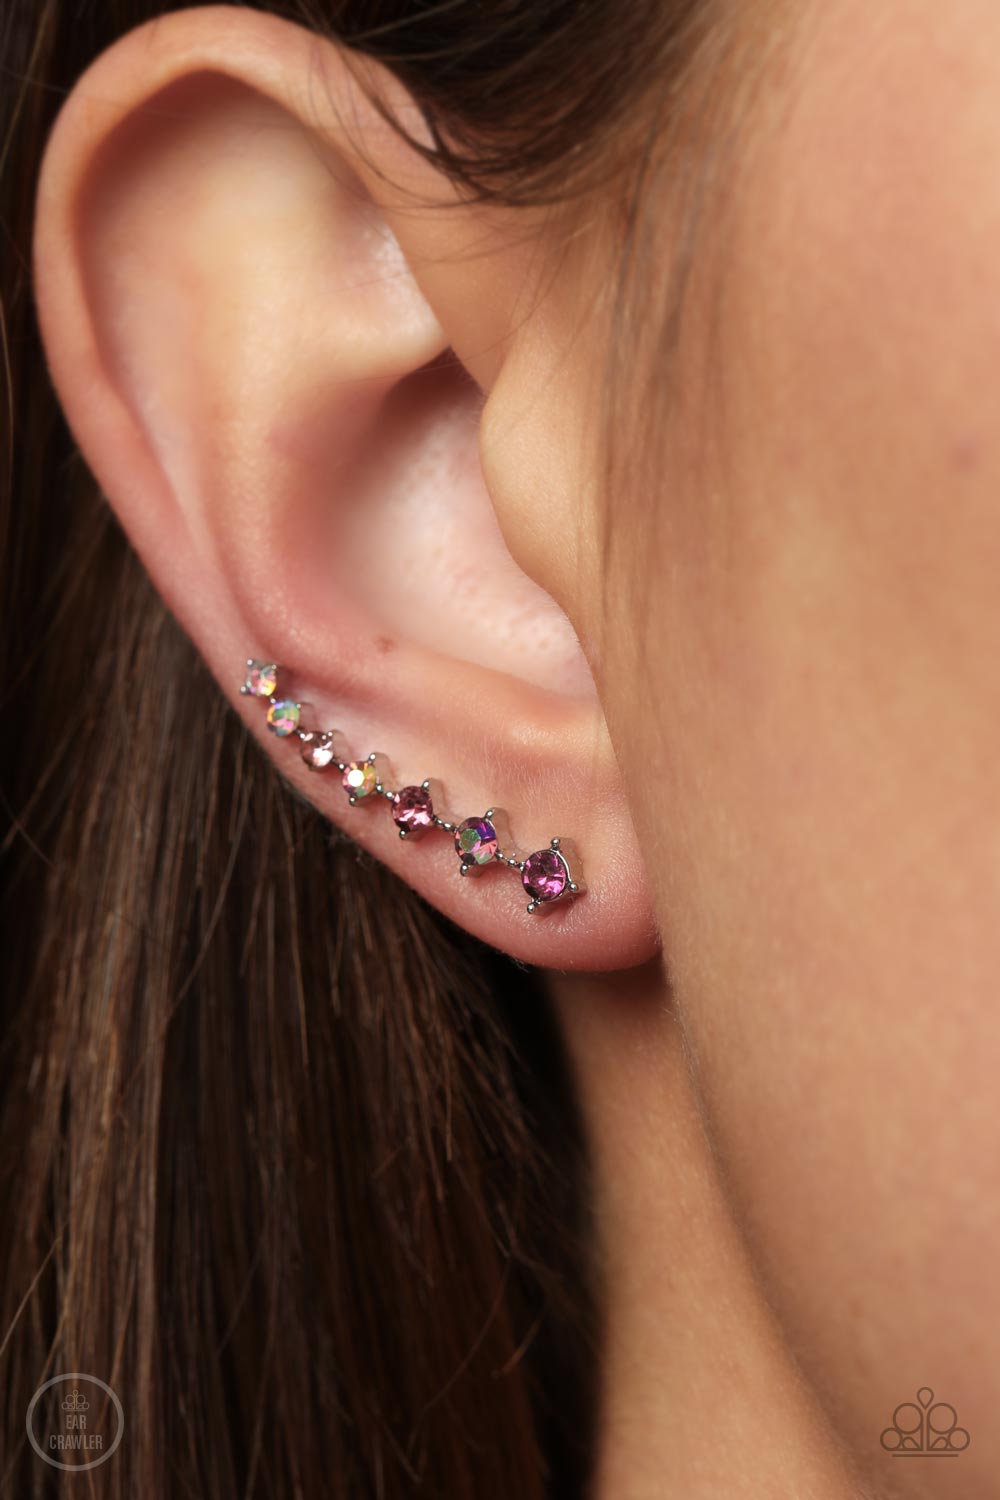 STARLIGHT Show Pink Ear Crawler Earring - Paparazzi Accessories  An iridescent spectrum of dainty pink rhinestones gradually increase in intensity as they climb the ear for a stellar fashion. Features an extended post fitting that climbs the back of the ear and can be pressed together for a more secure fit.  Sold as one pair of ear crawlers.